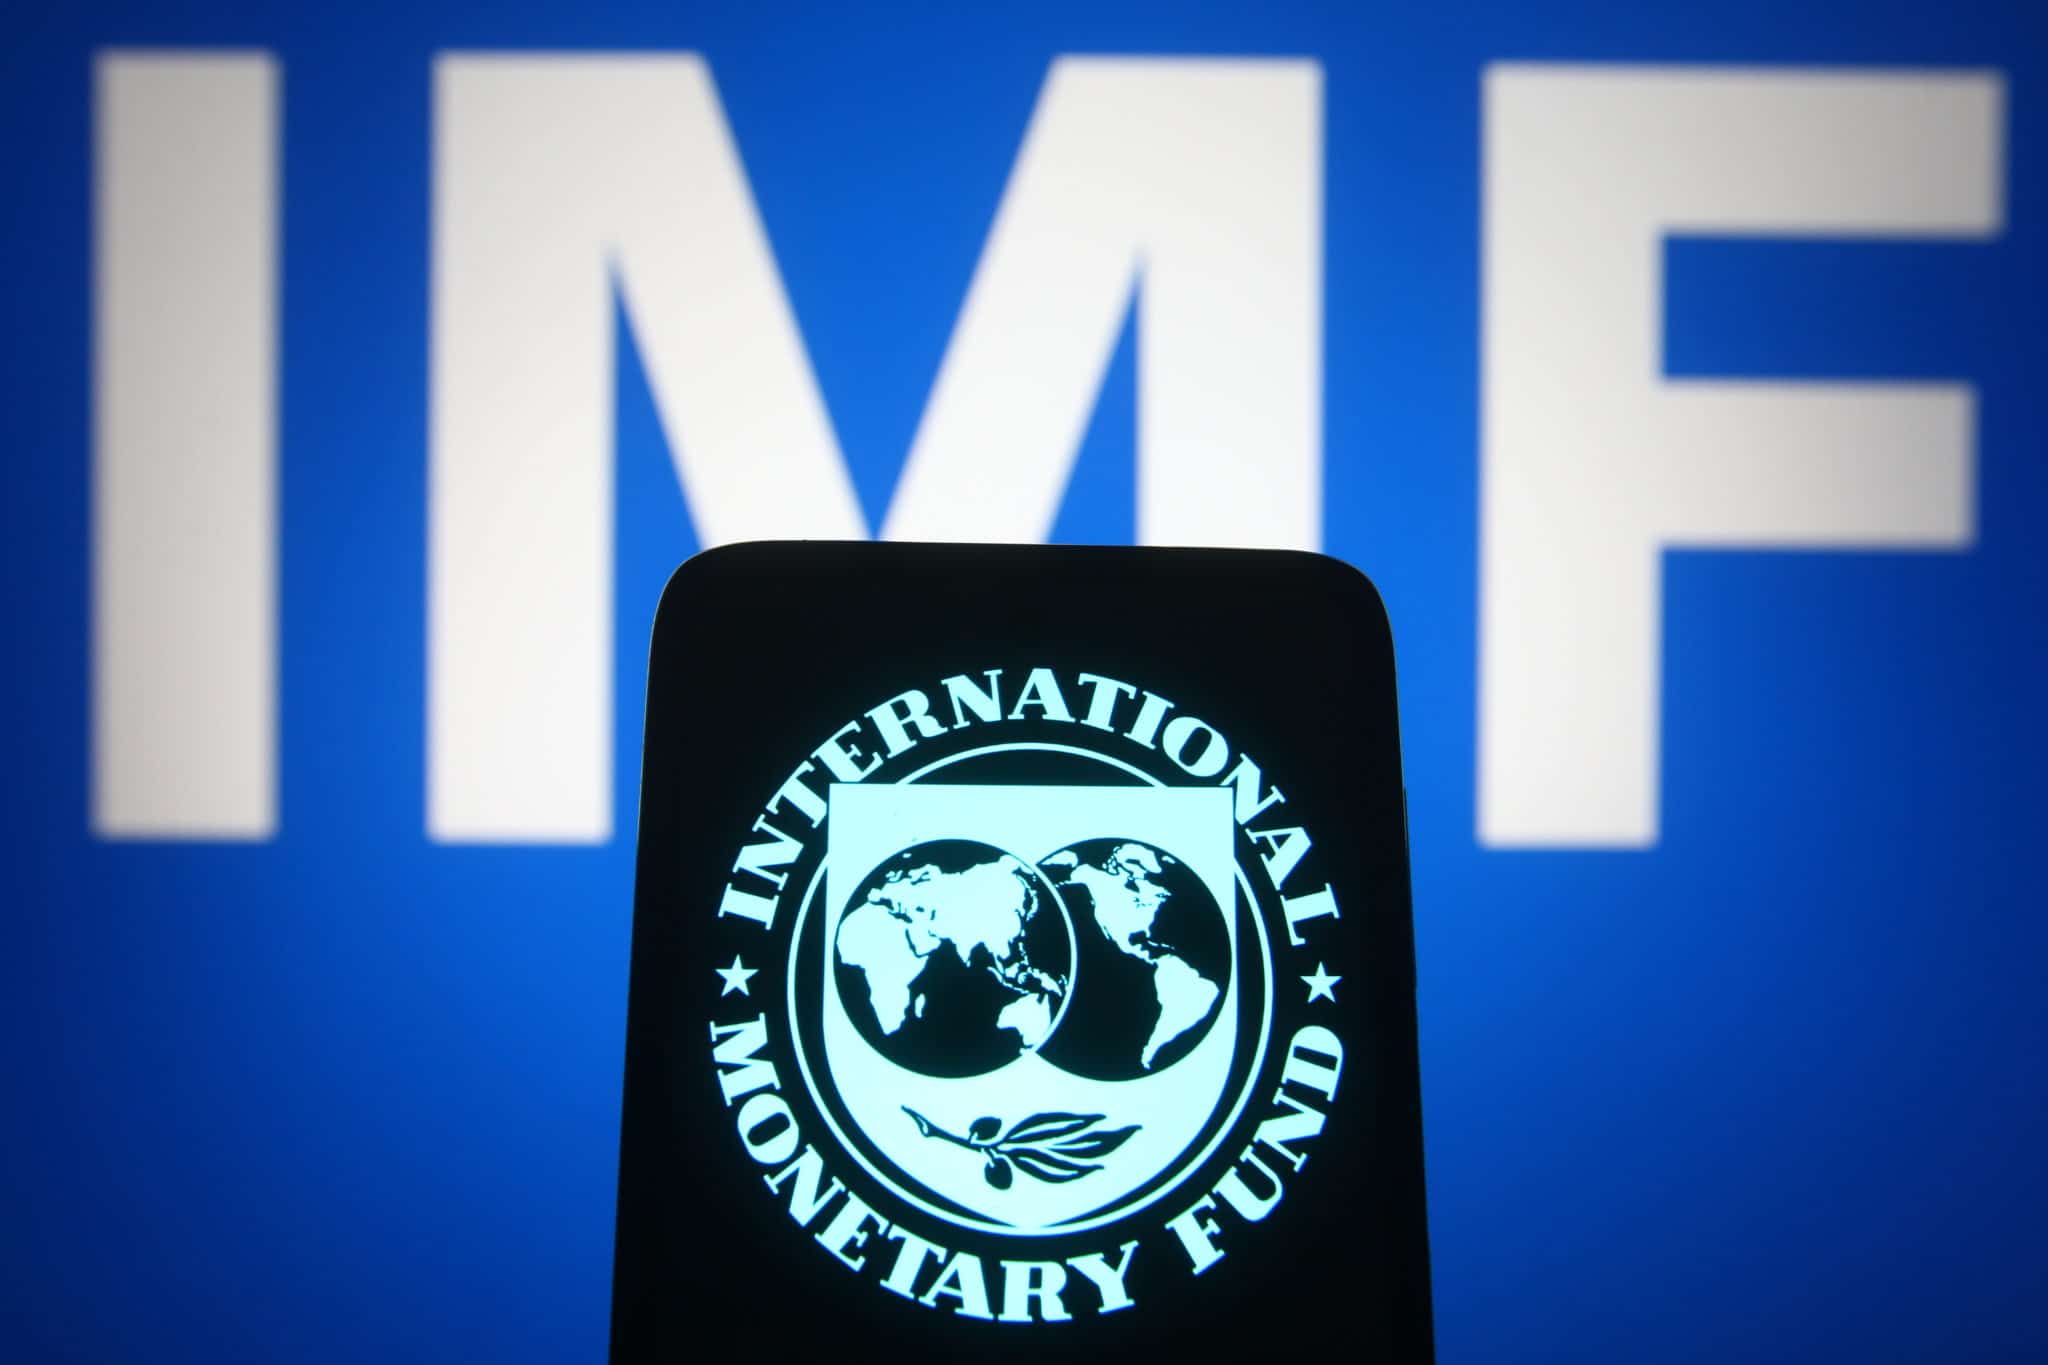 IMF calls for coordinated action, accountability in COVID-19 battle